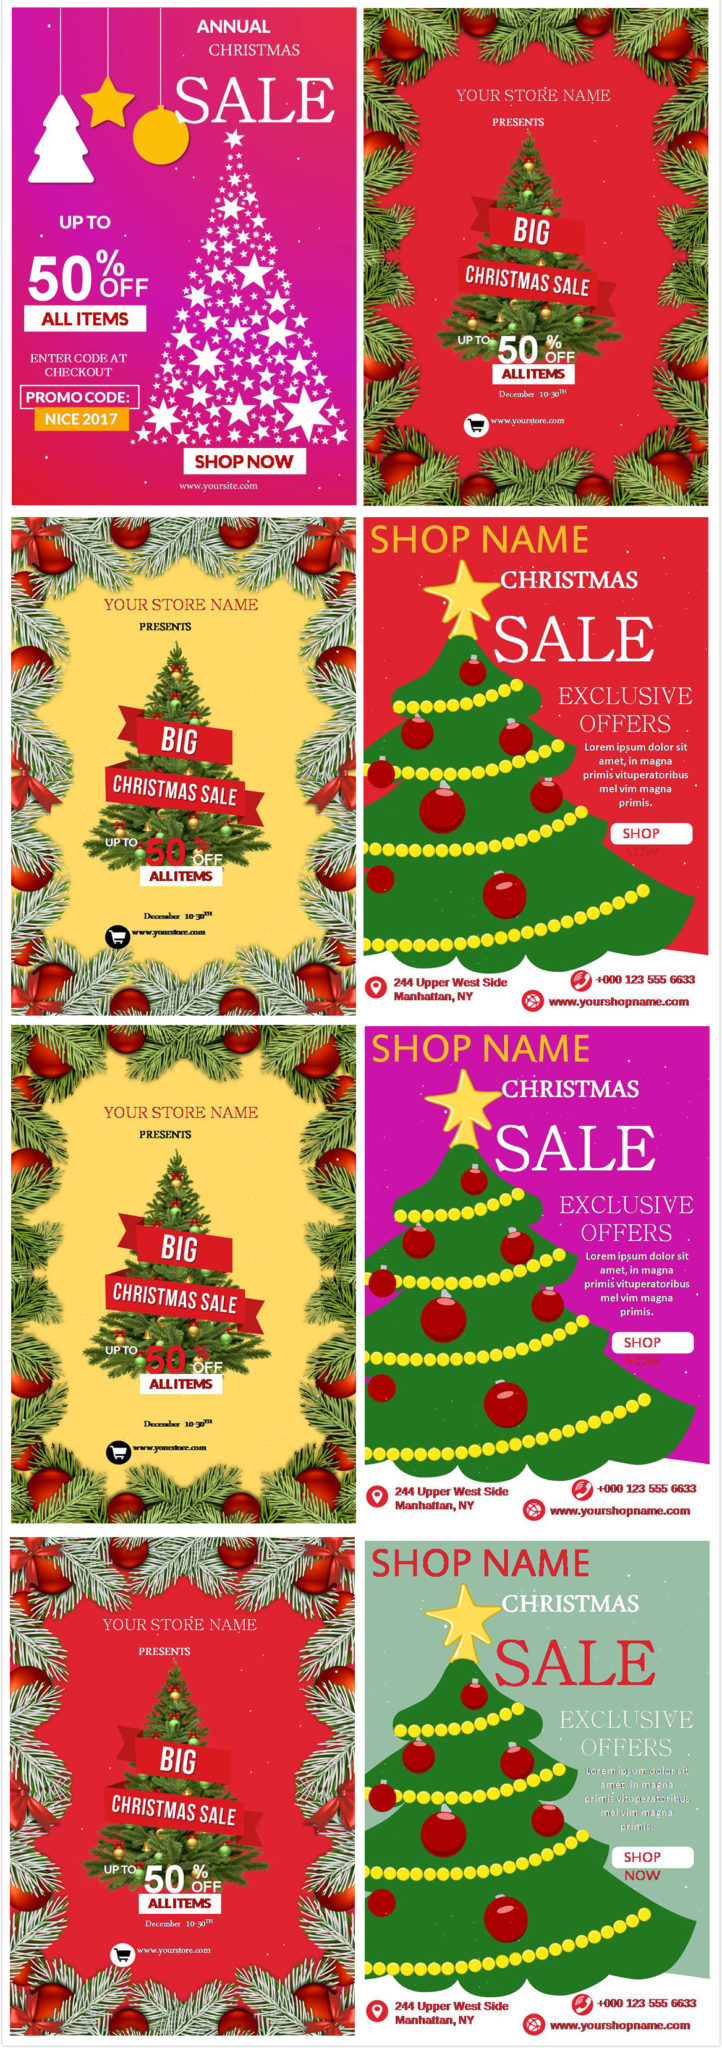 10+ Ultimate Christmas Flyer Wishes and Sales Templates